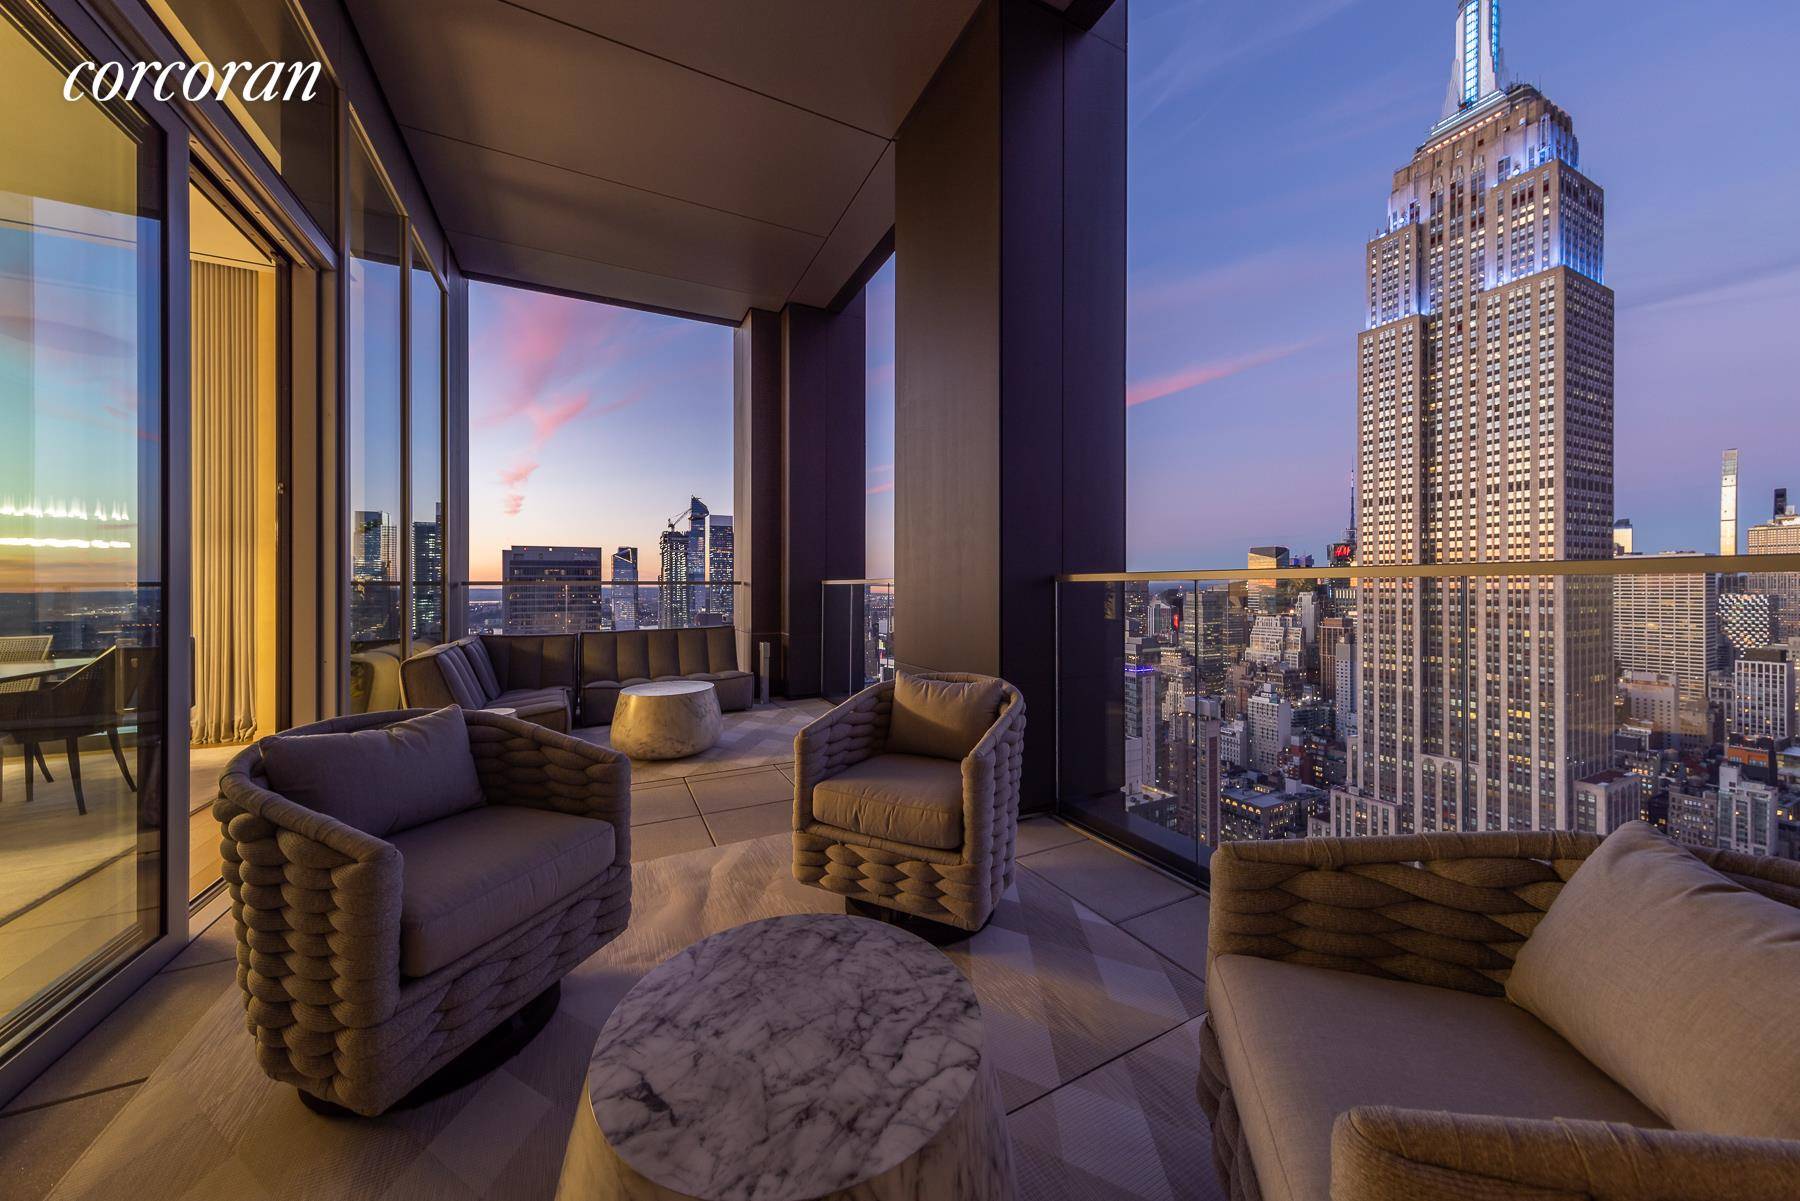 IMMEDIATE OCCUPANCY ! 277 Fifth Avenue, the tallest residential building on Fifth Avenue, offers truly spectacular 360 degree views from this special full floor residence that span the city and ...